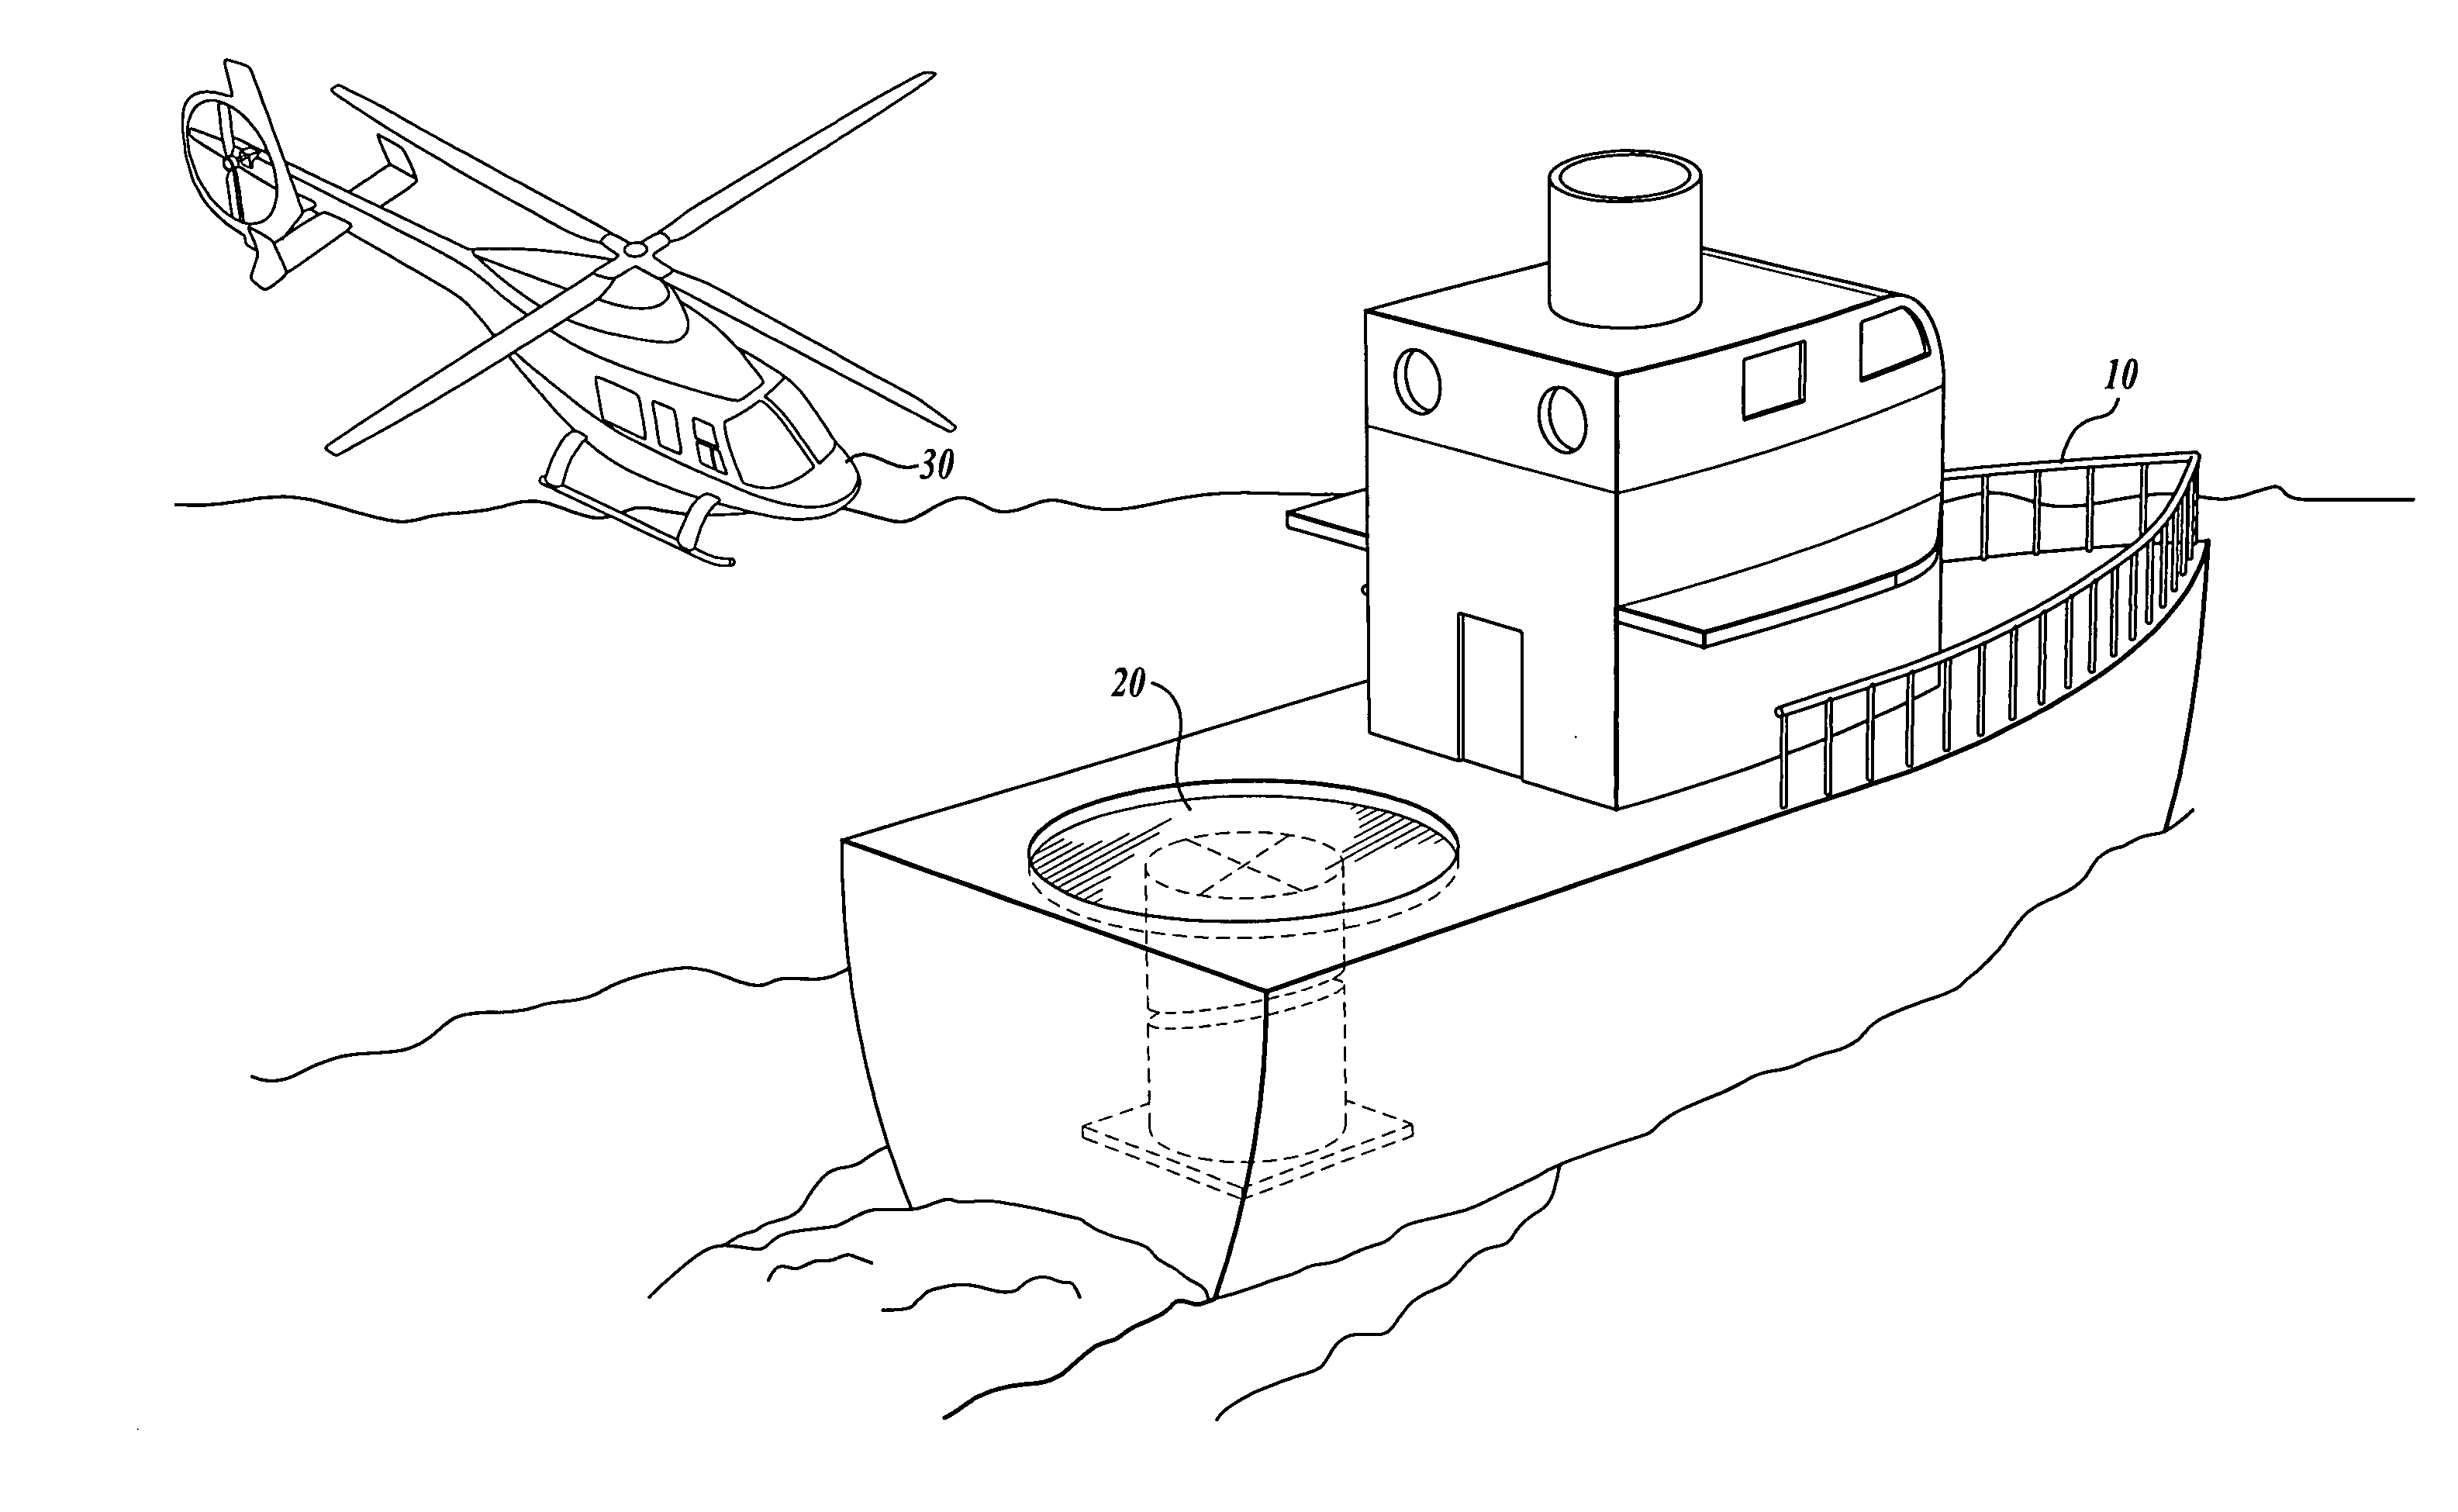 Stabilizing surface for flight deck or other uses